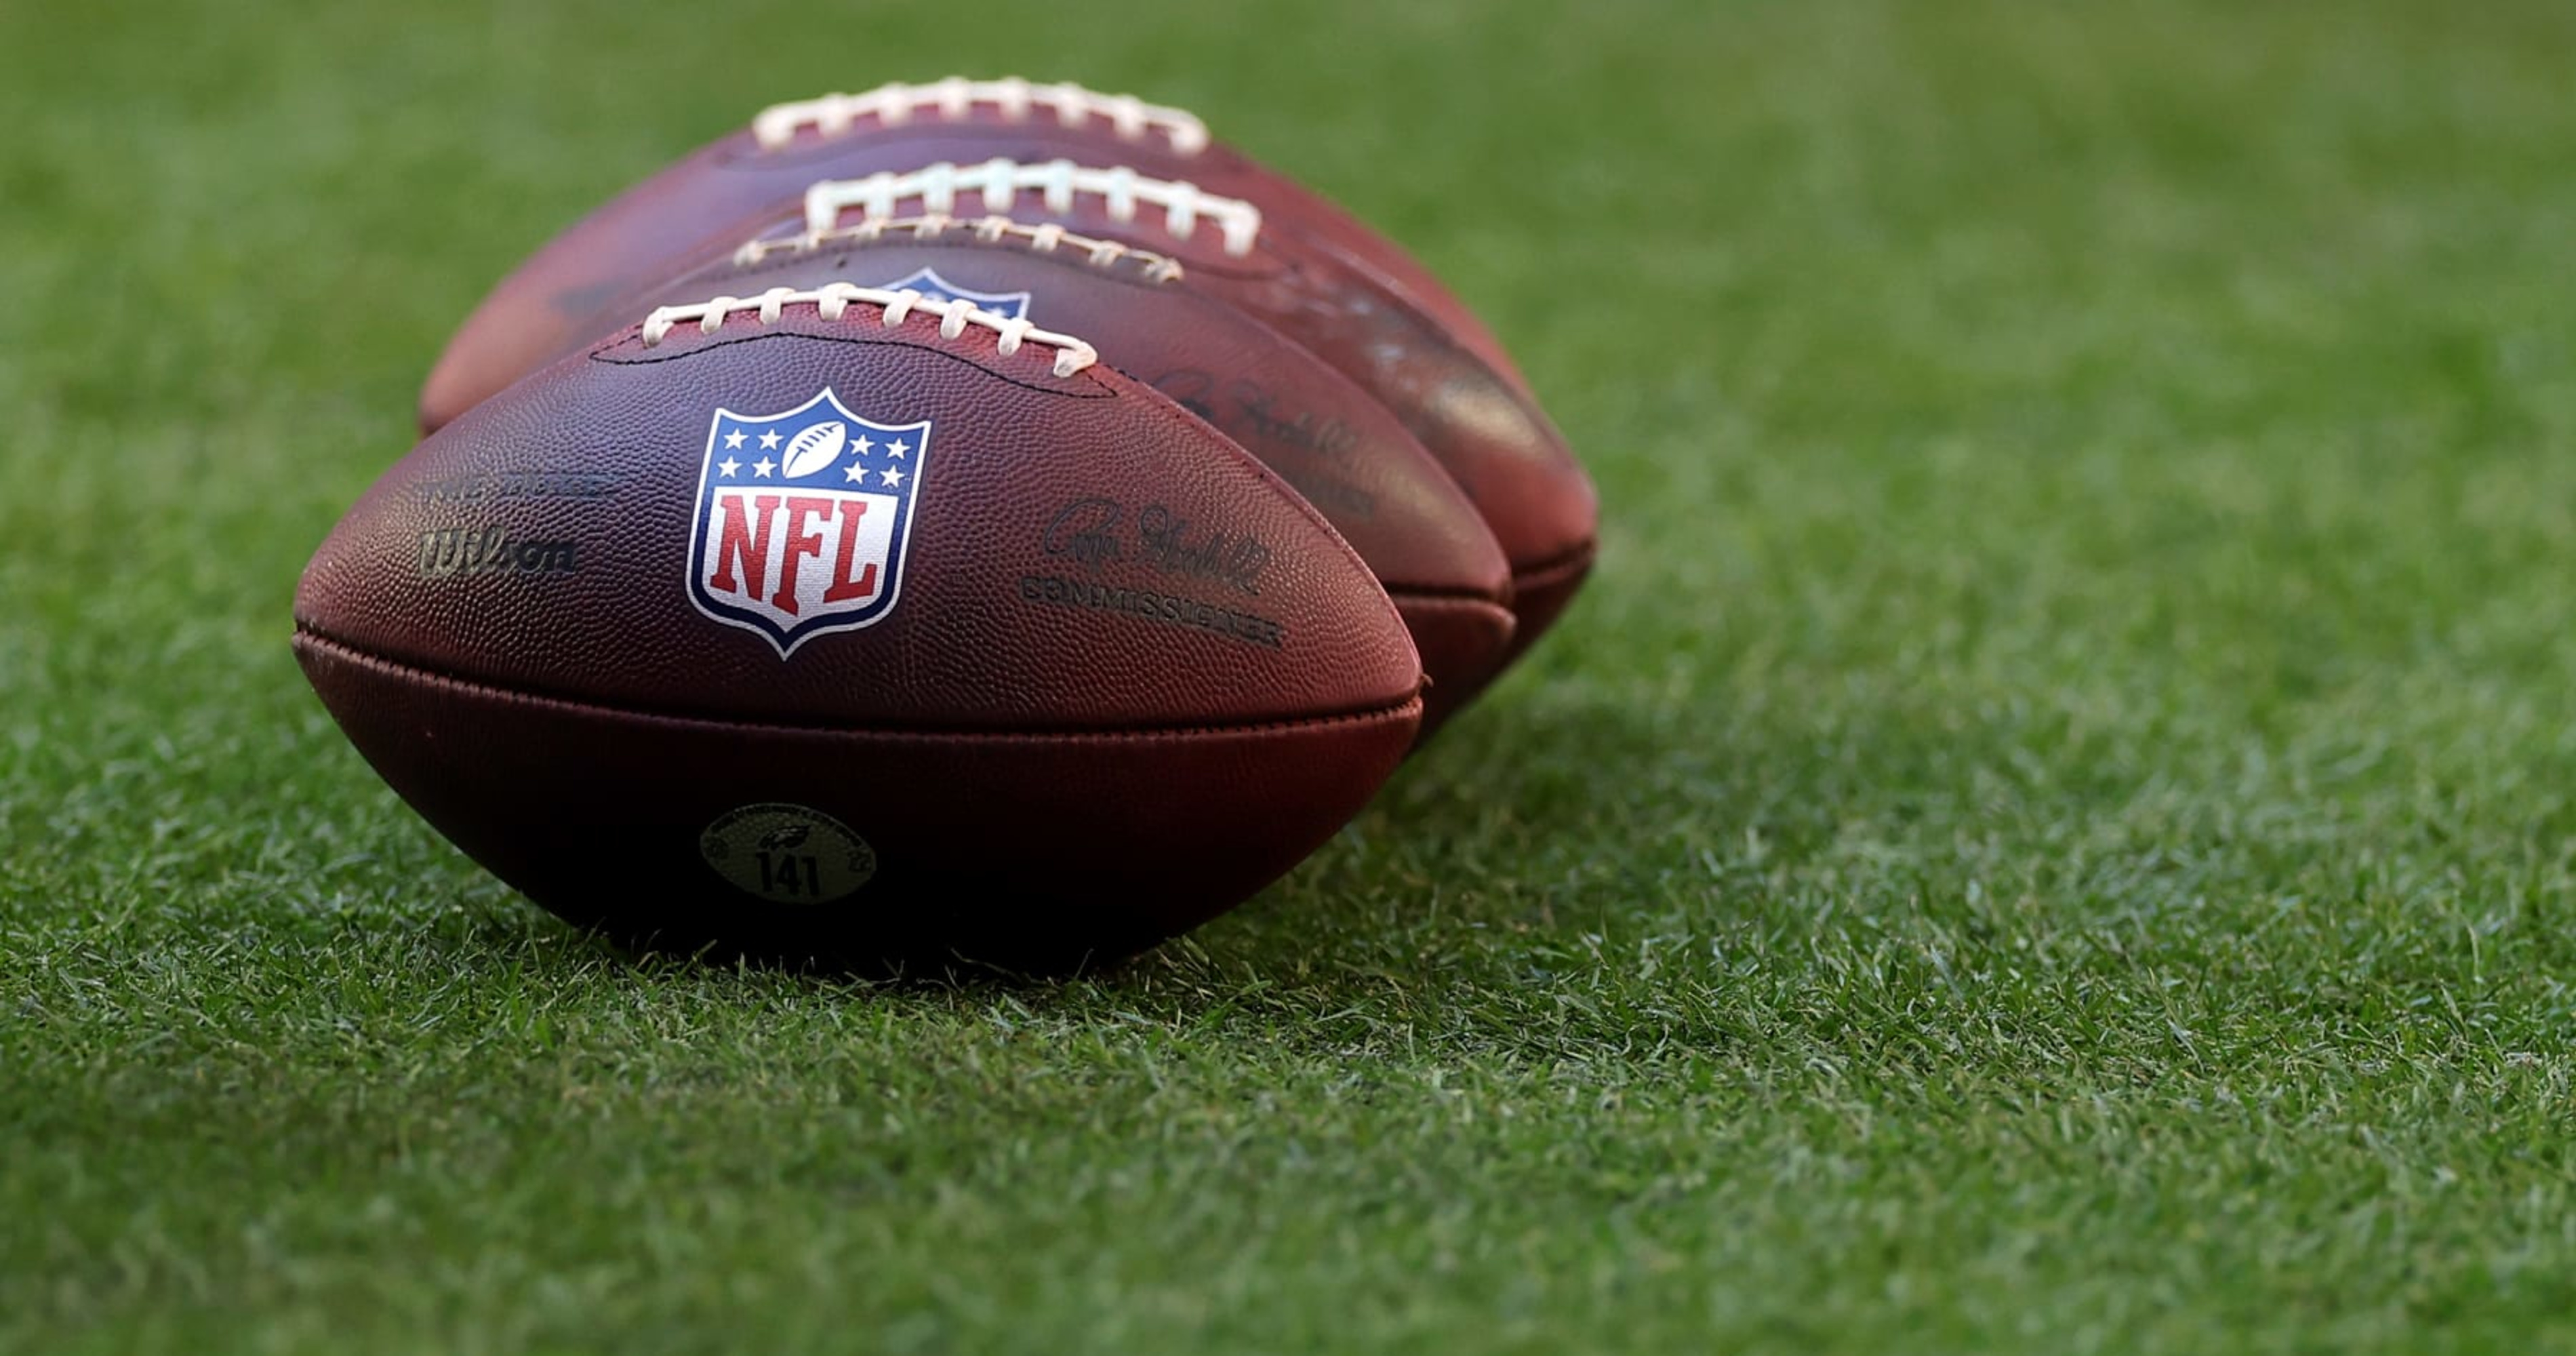 2023 NFL Rule Changes Proposed Including 4thand15 'Onside Kick,' 3rd